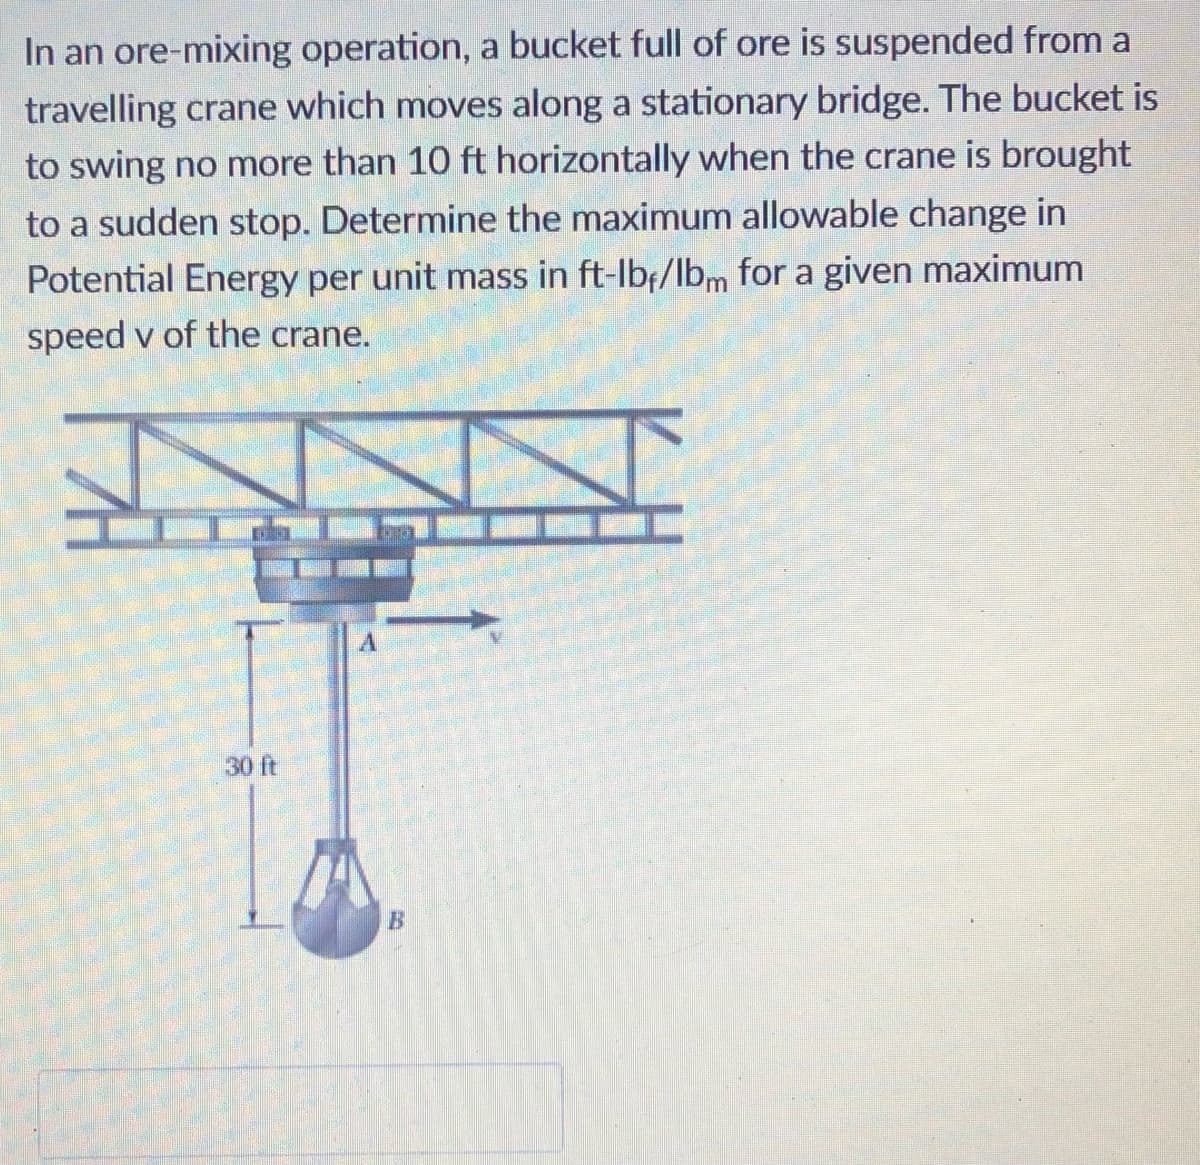 In an ore-mixing operation, a bucket full of ore is suspended from a
travelling crane which moves along a stationary bridge. The bucket is
to swing no more than 10 ft horizontally when the crane is brought
to a sudden stop. Determine the maximum allowable change in
Potential Energy per unit mass in ft-lbf/lbm for a given maximum
speed v of the crane.
30 ft
